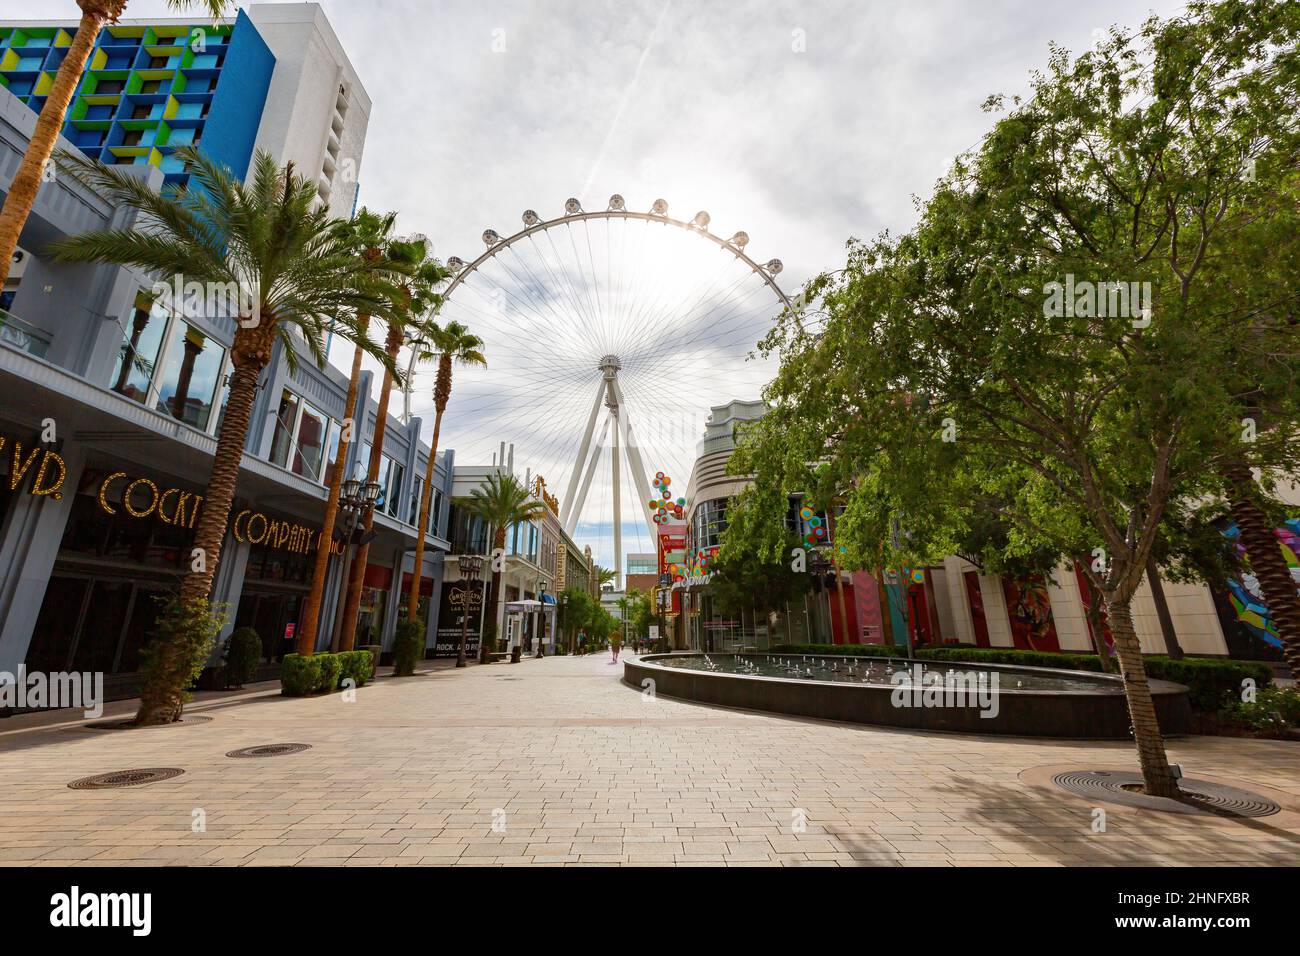 Las Vegas, AUG 6 2015 - Sunny view of the High Roller Stock Photo